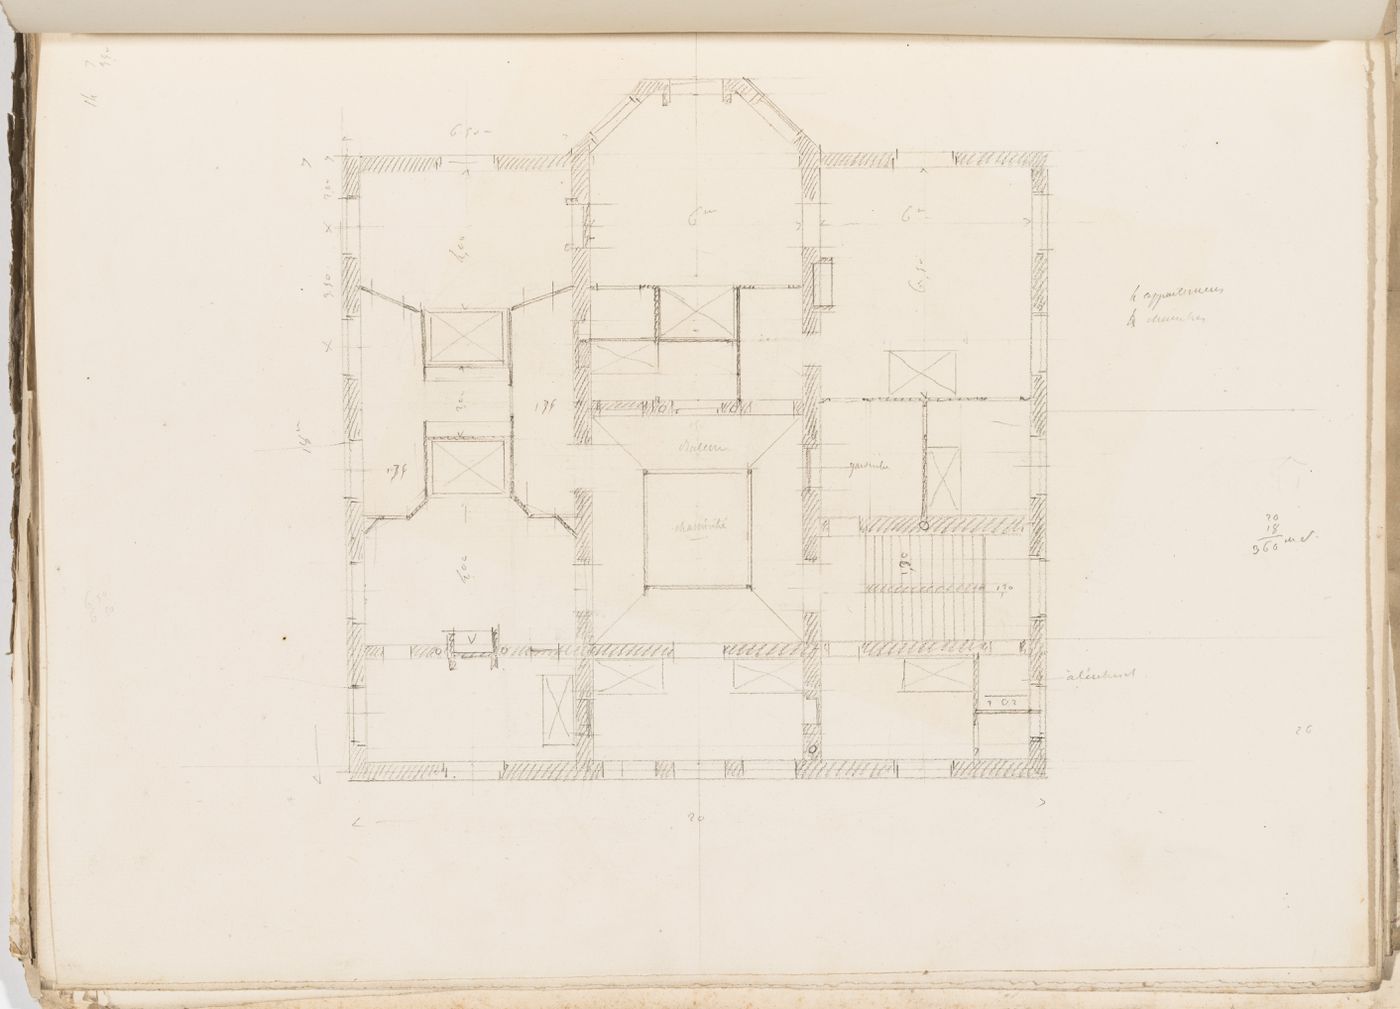 Project no. 2 for a country house for comte Treilhard: First floor plan